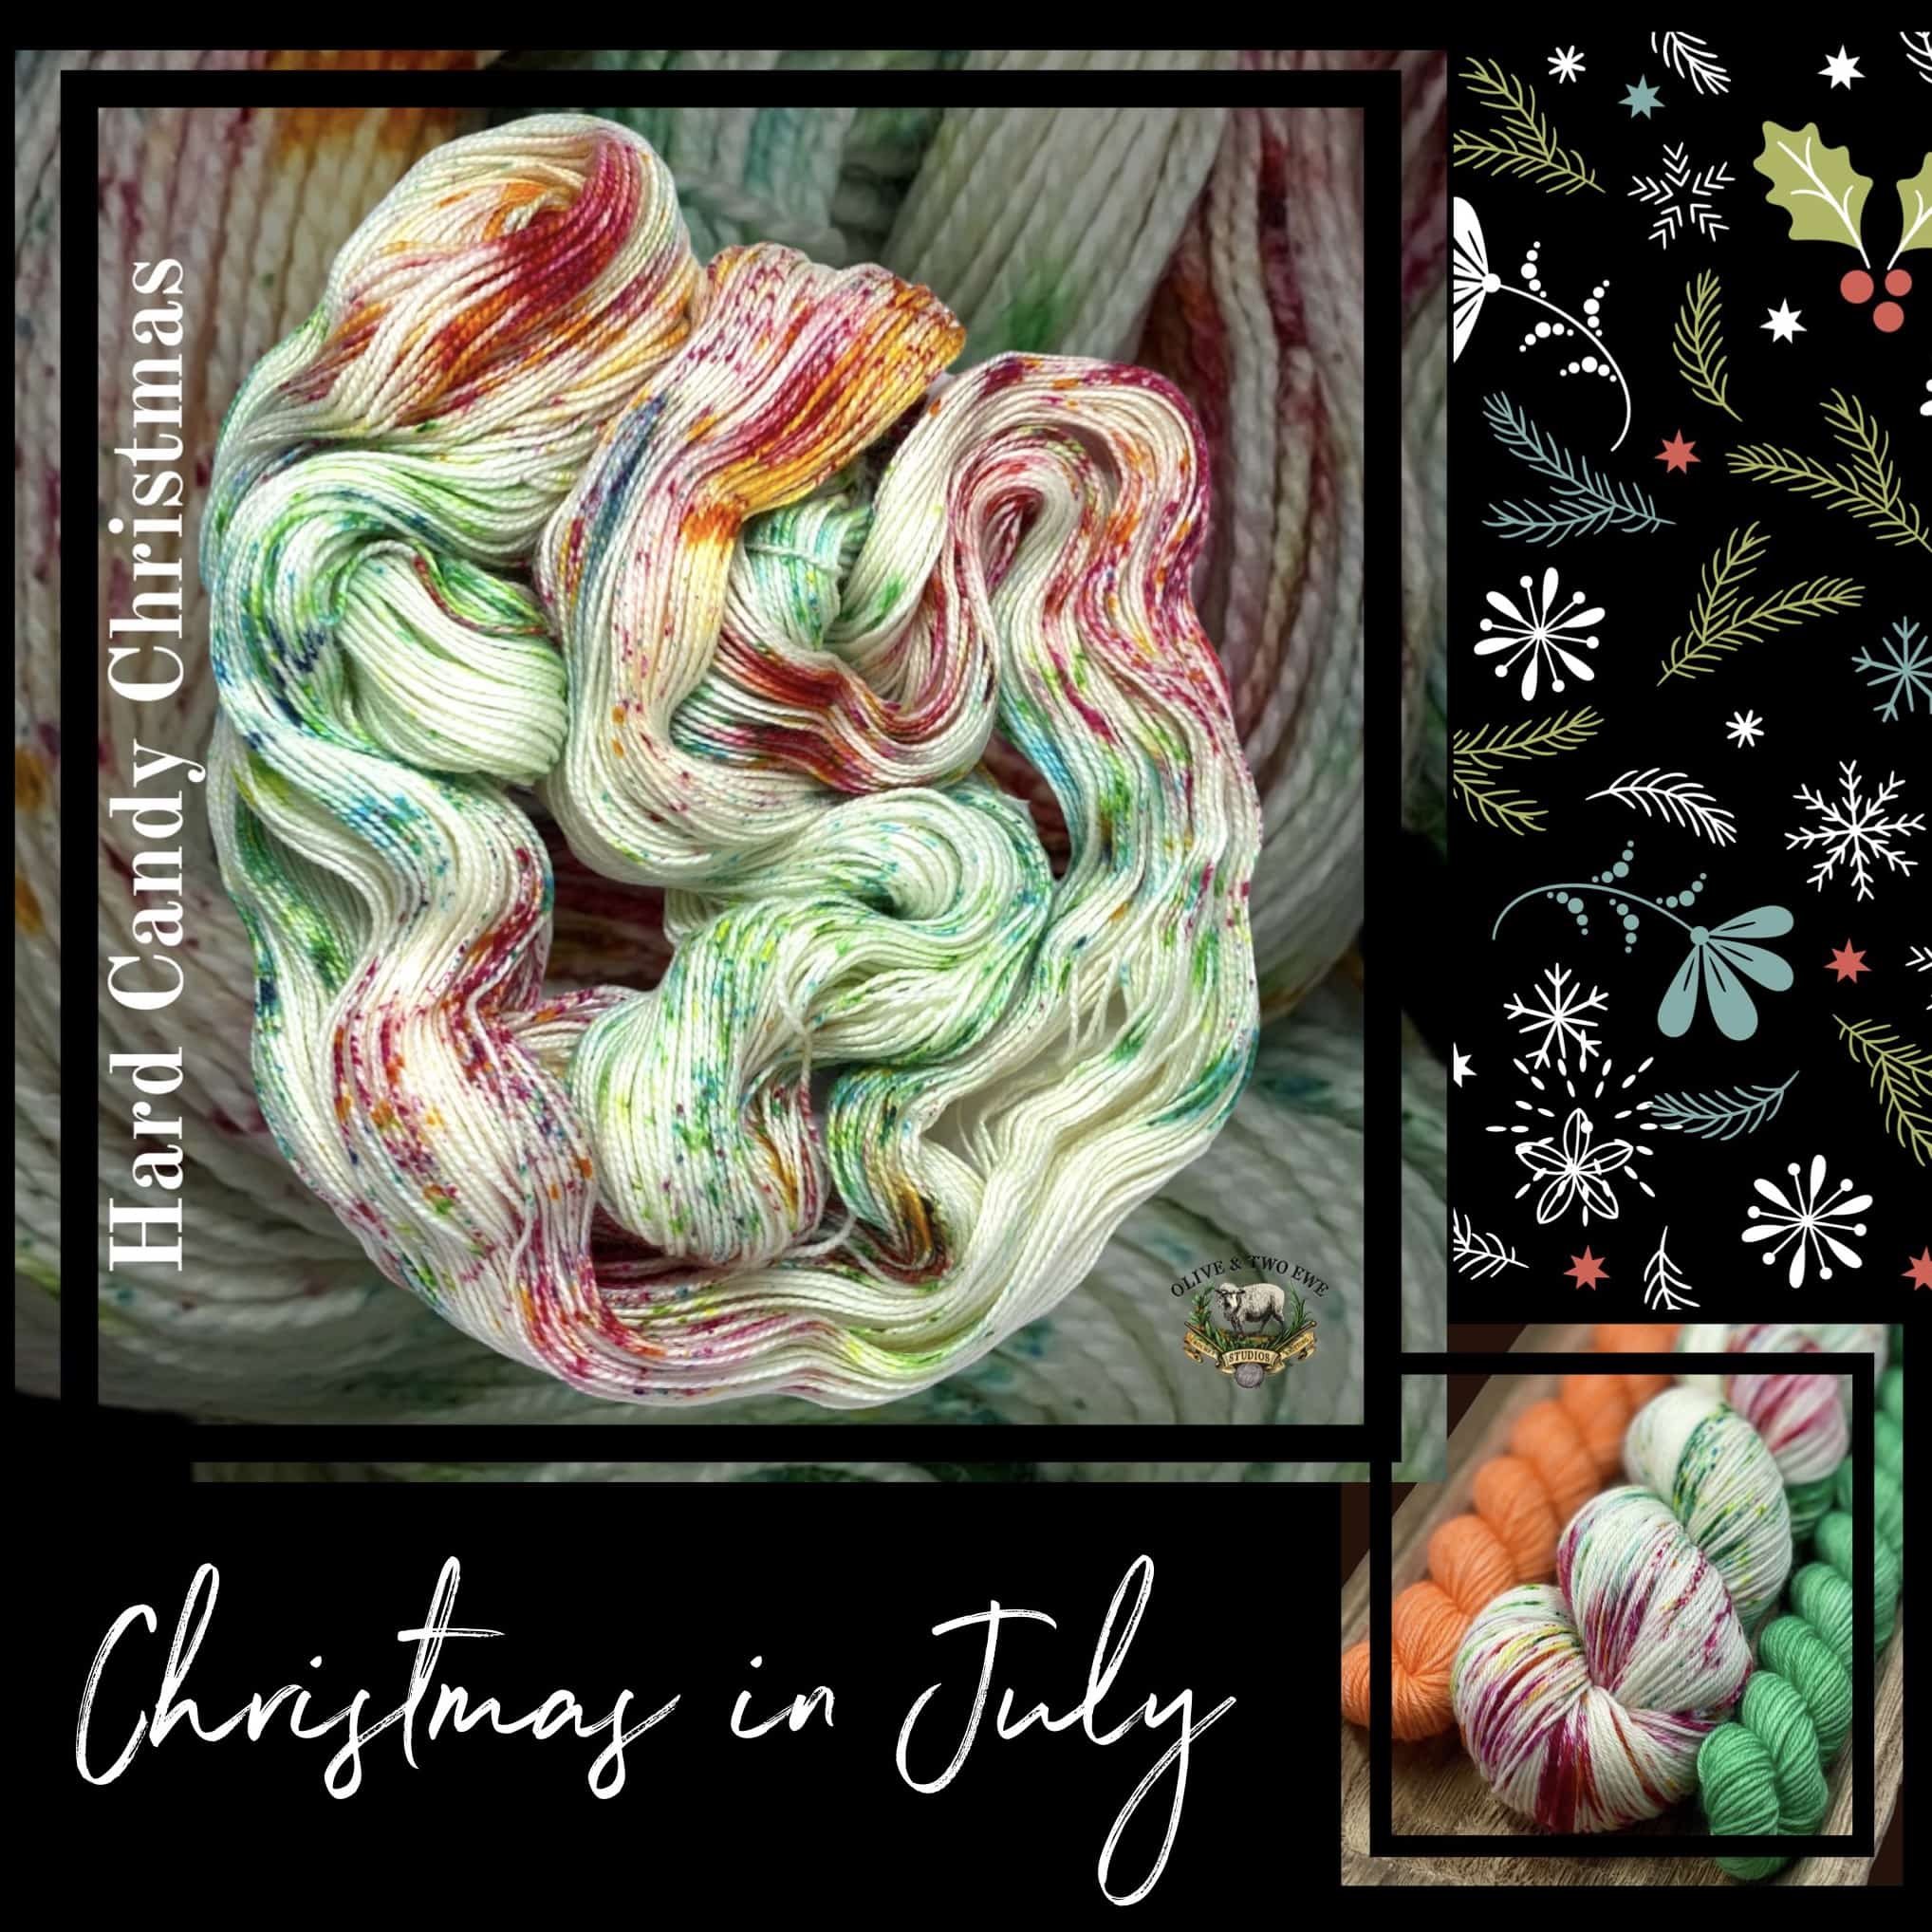 A skein of red and green speckled yarn unfurled and the same skein twisted with orange and green minis. The text Hard Candy Christmas and Christmas in July.